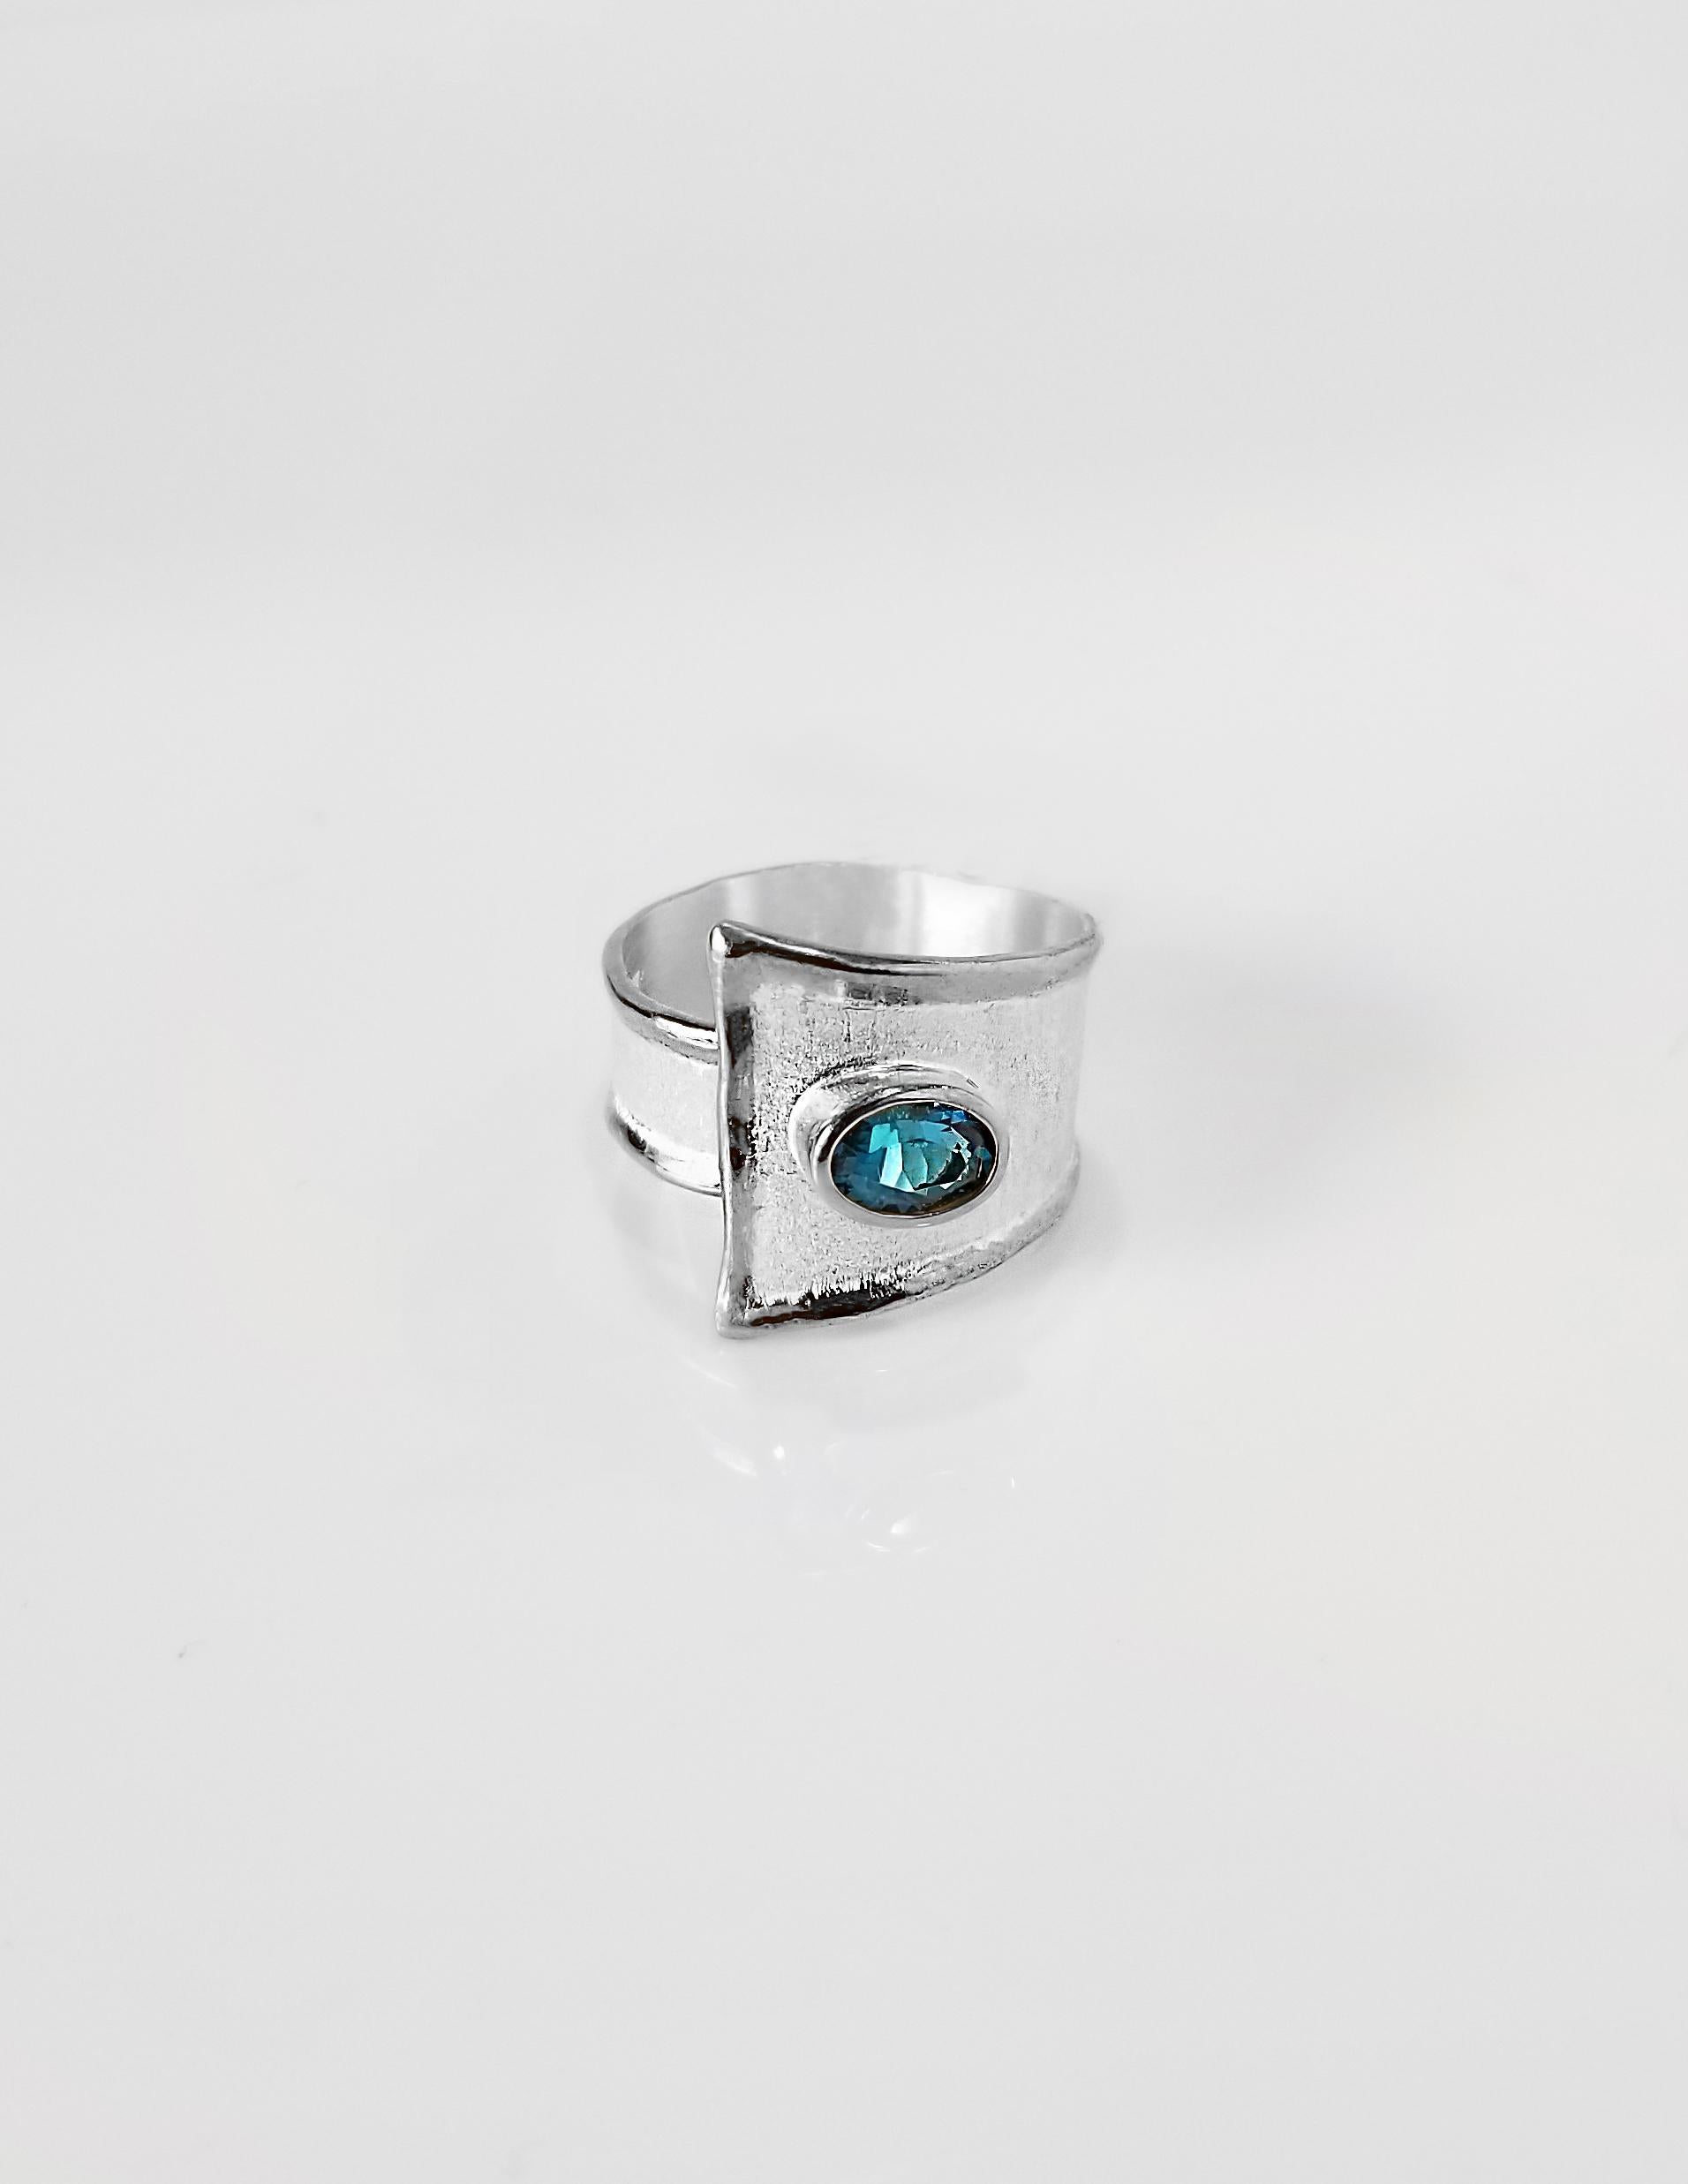 Yianni Creations Ammos Collection band Ring from Fine Silver featuring a 1.60 Carat London Blue Topaz complemented by unique techniques of craftsmanship - brushed texture and nature-inspired liquid edges. The core of this gorgeous